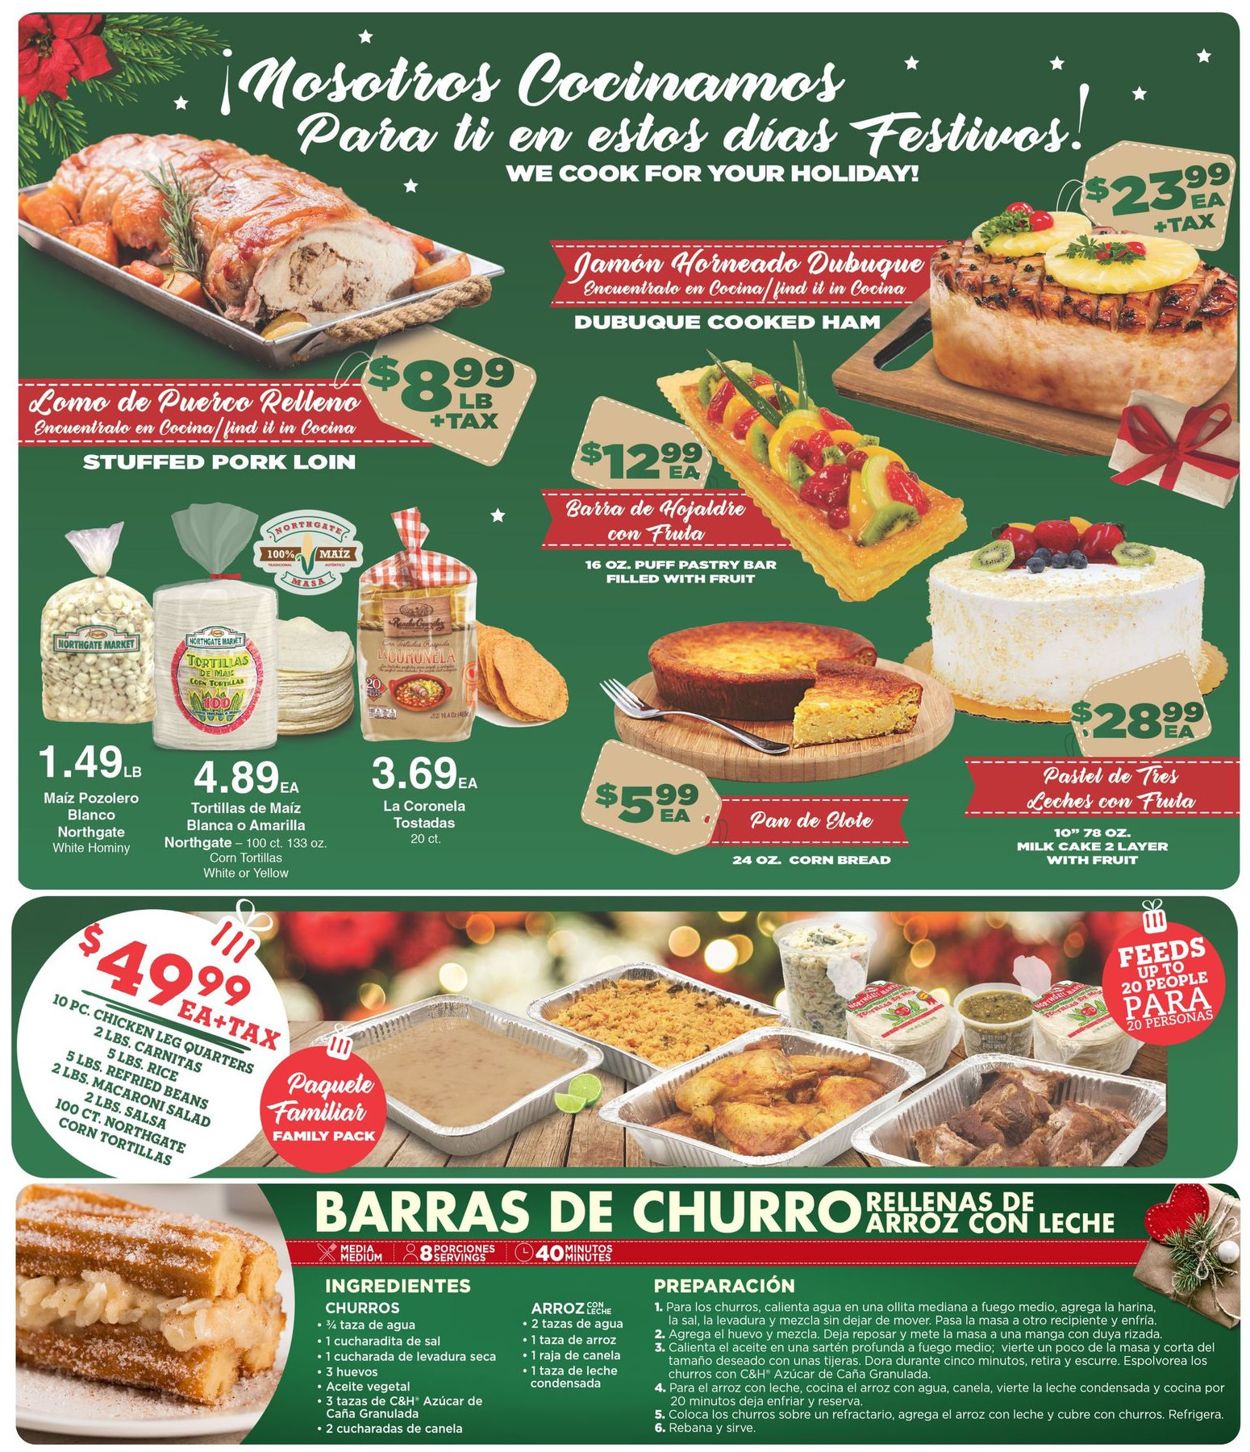 Northgate Market Ad from 12/25/2019